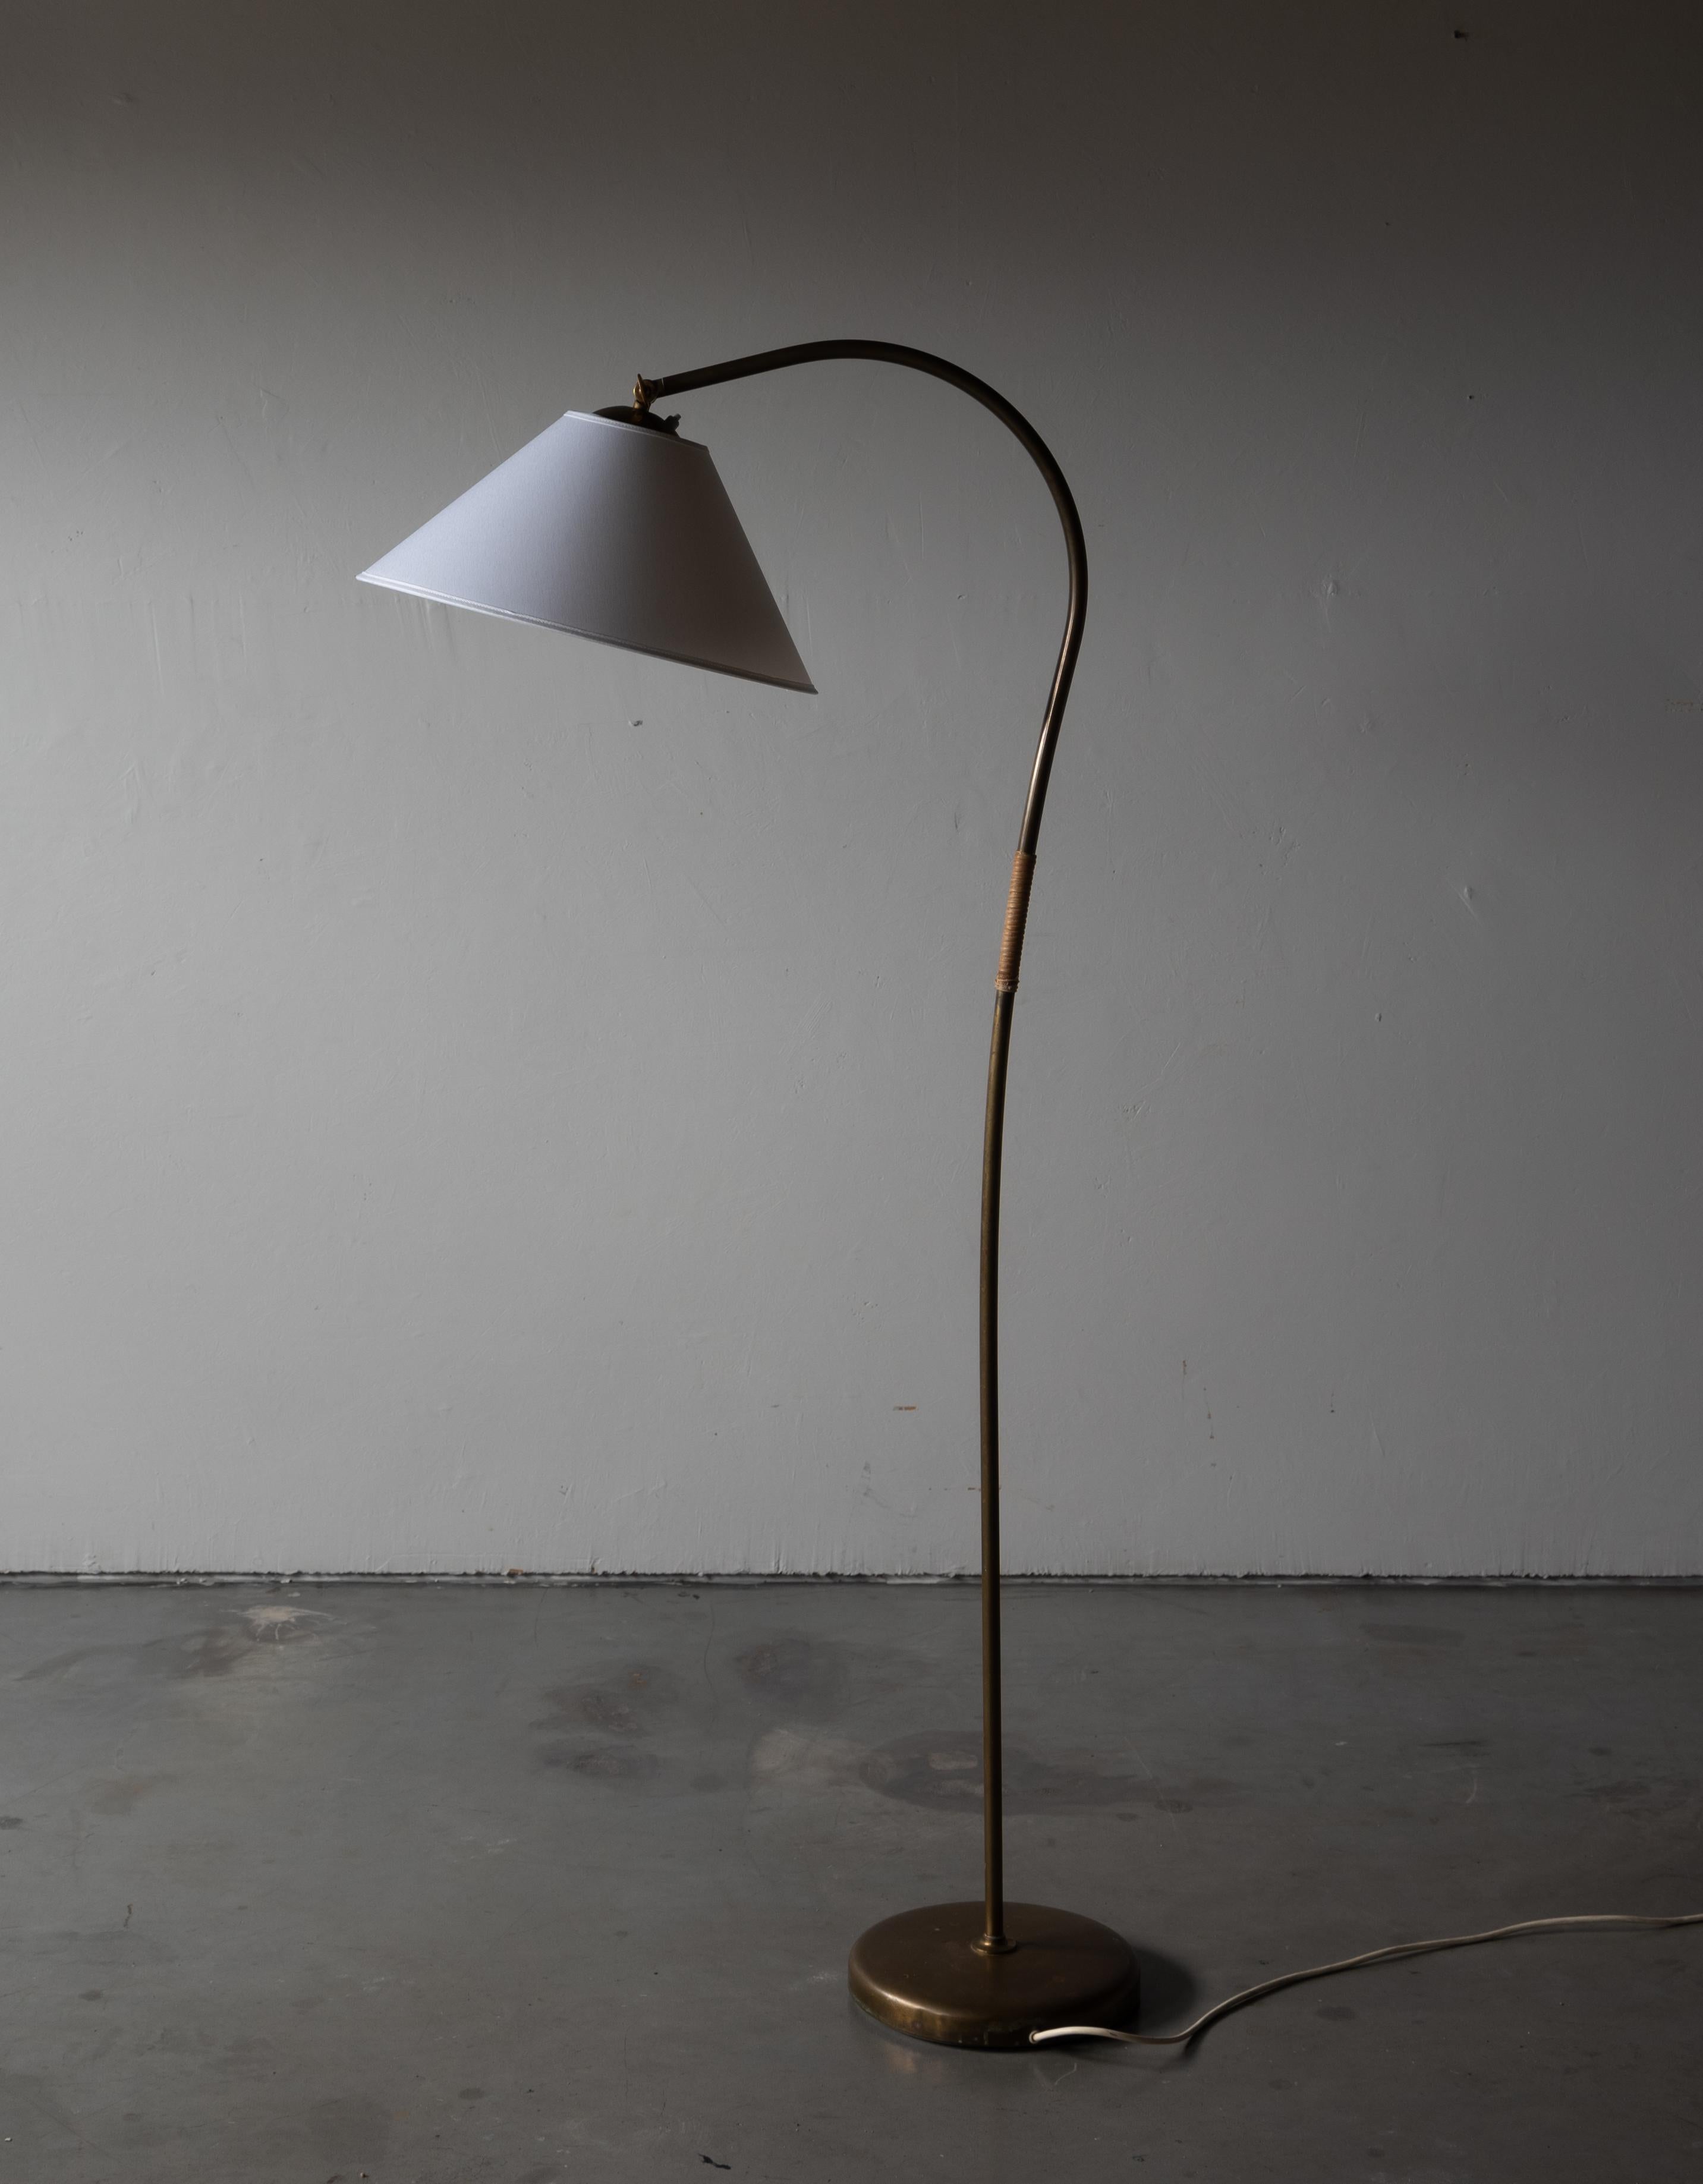 An adjustable functionalist floor lamp. Designed and produced in Austria, c. 1940s. In brass. Brand new lampshade.

Dimensions stated measured with lampshade attached.